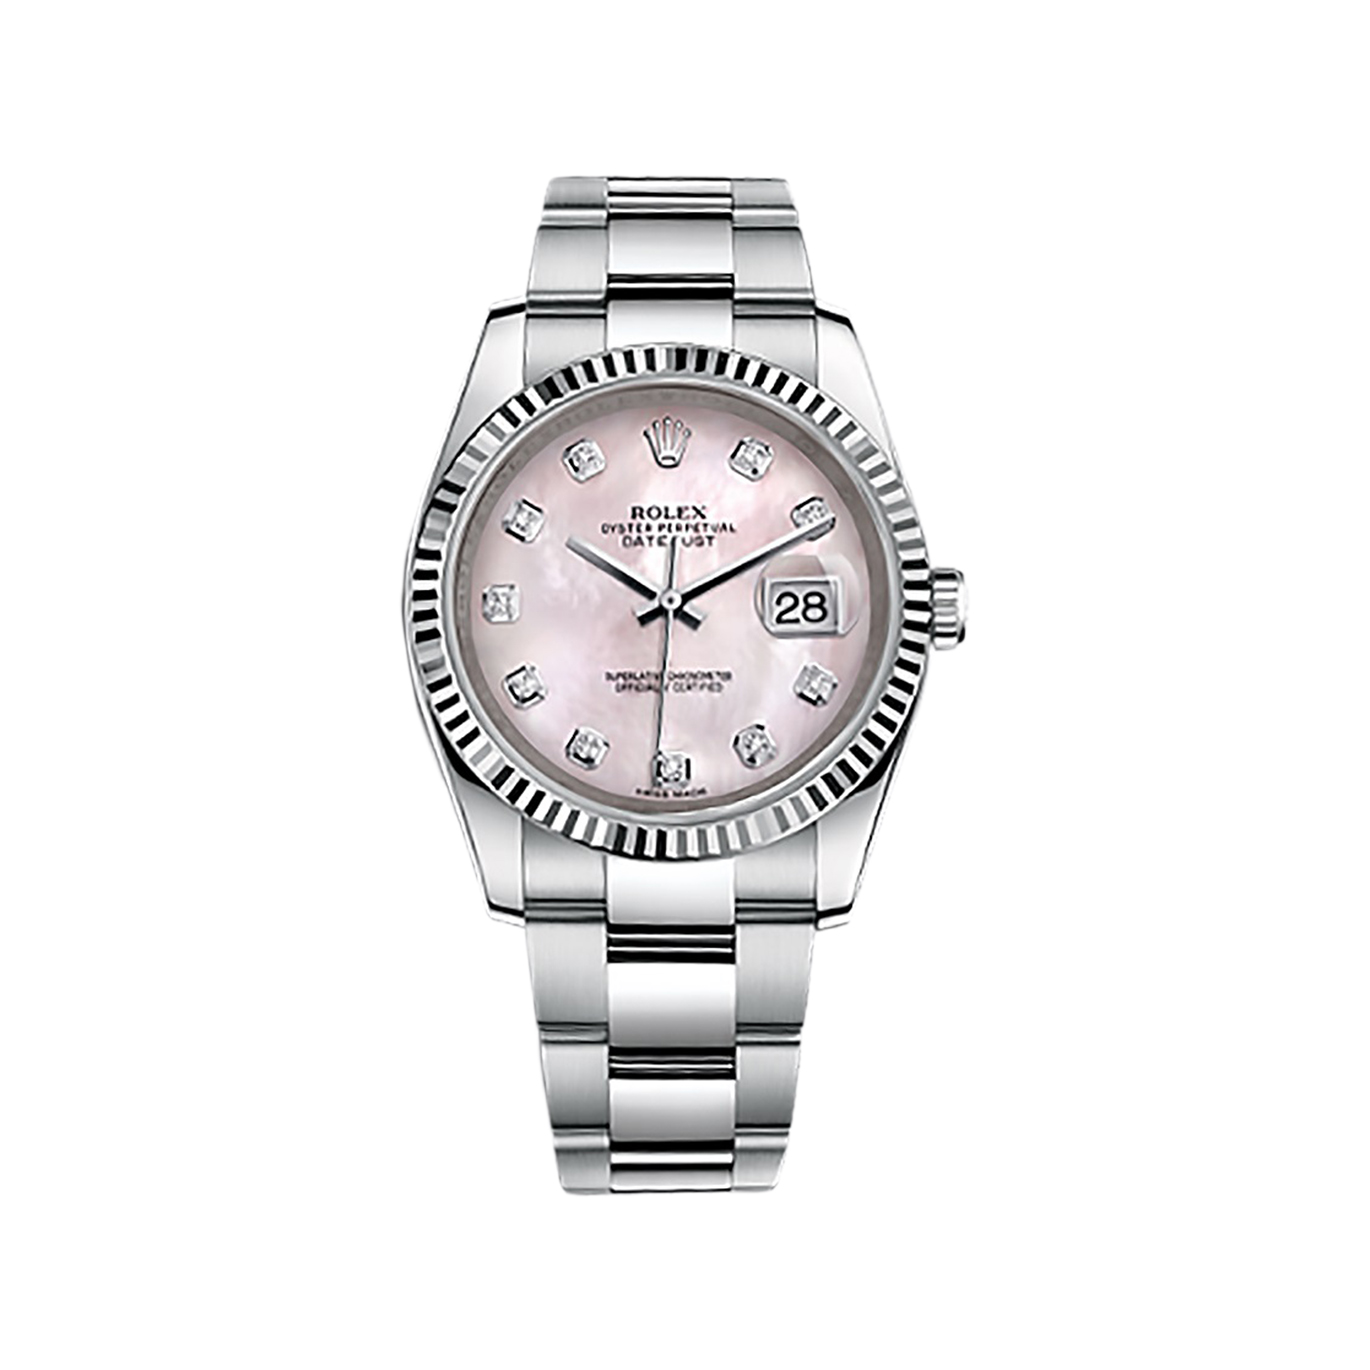 Datejust 36 116234 White Gold & Stainless Steel Watch (Pink Mother-of-Pearl Set with Diamonds)